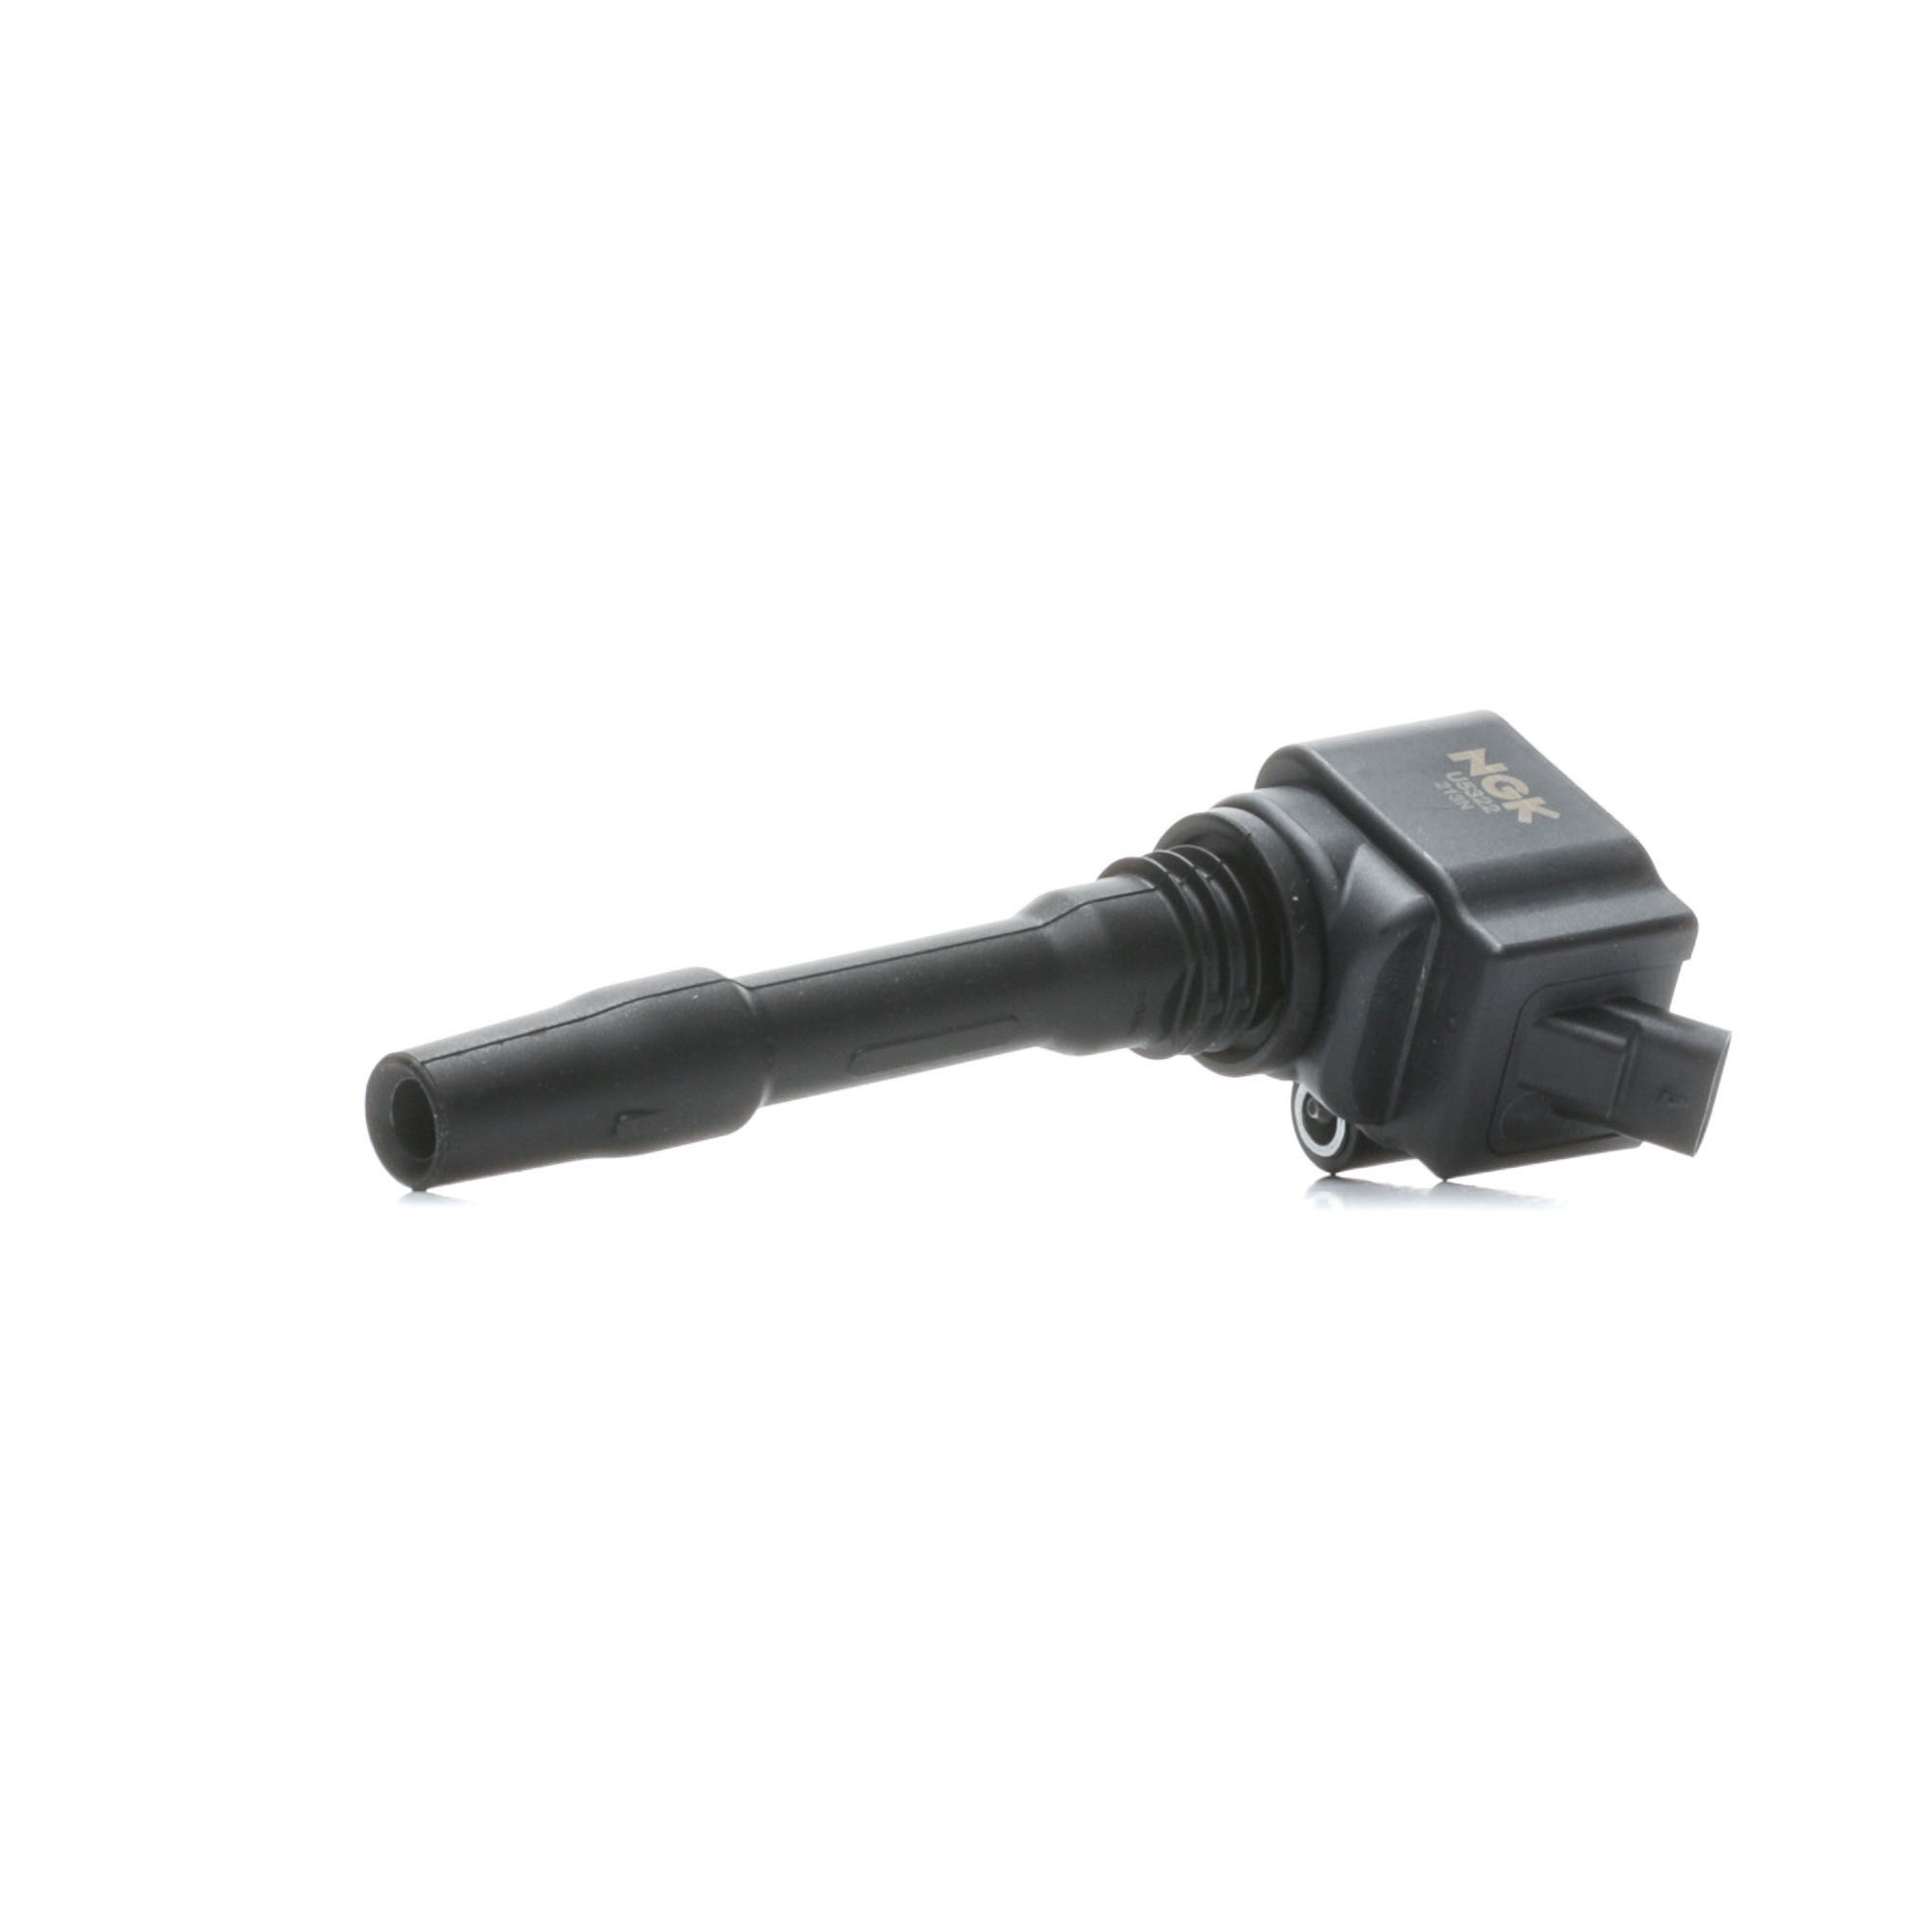 Buy Ignition coil NGK 49061 - Glow plug system parts BMW G20 online